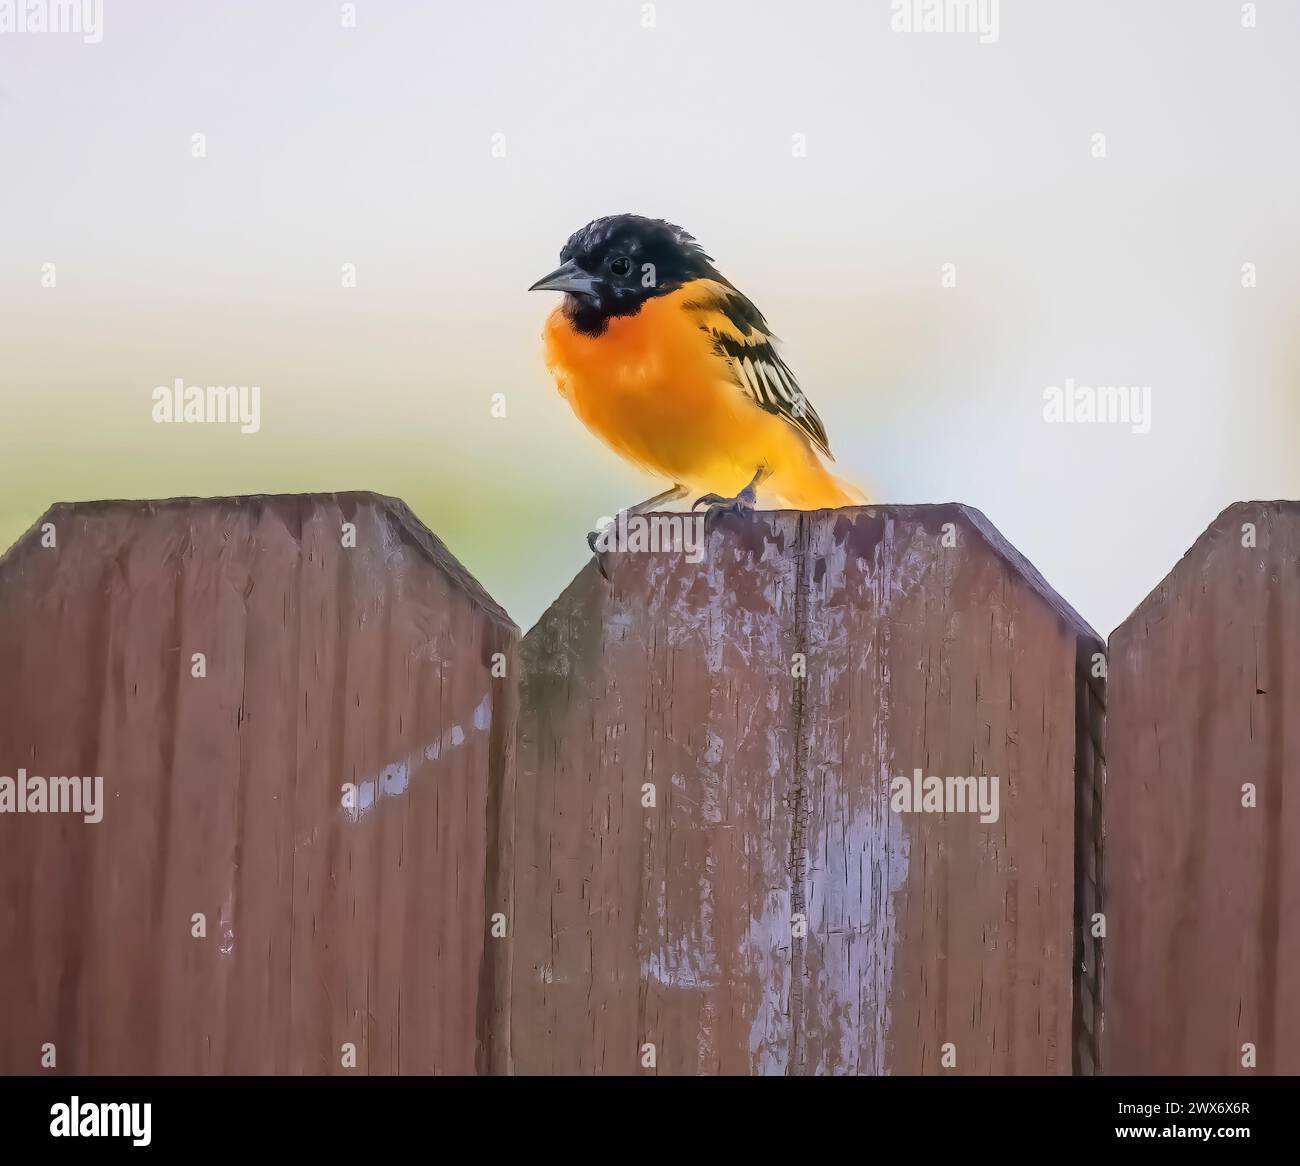 Male baltimore oriole perched on a brown, wooden backyard fence on a summer day in Taylors Falls, Minnesota USA. Stock Photo